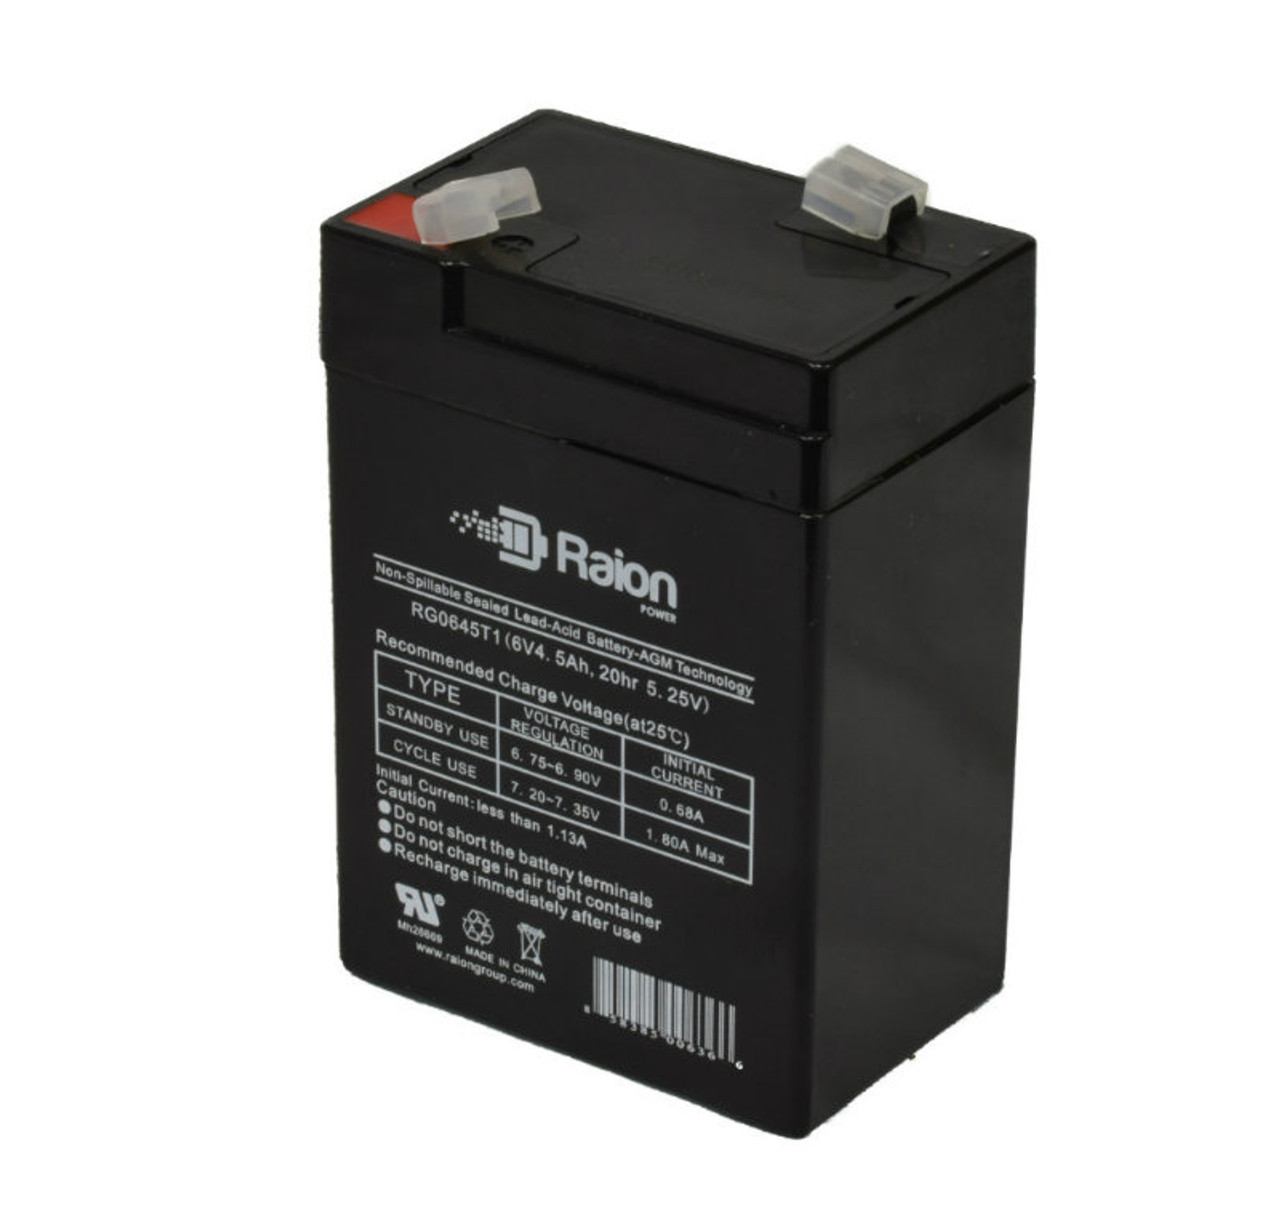 Raion Power RG0645T1 6V 4.5Ah Replacement Battery Cartridge for Edwards 17990108